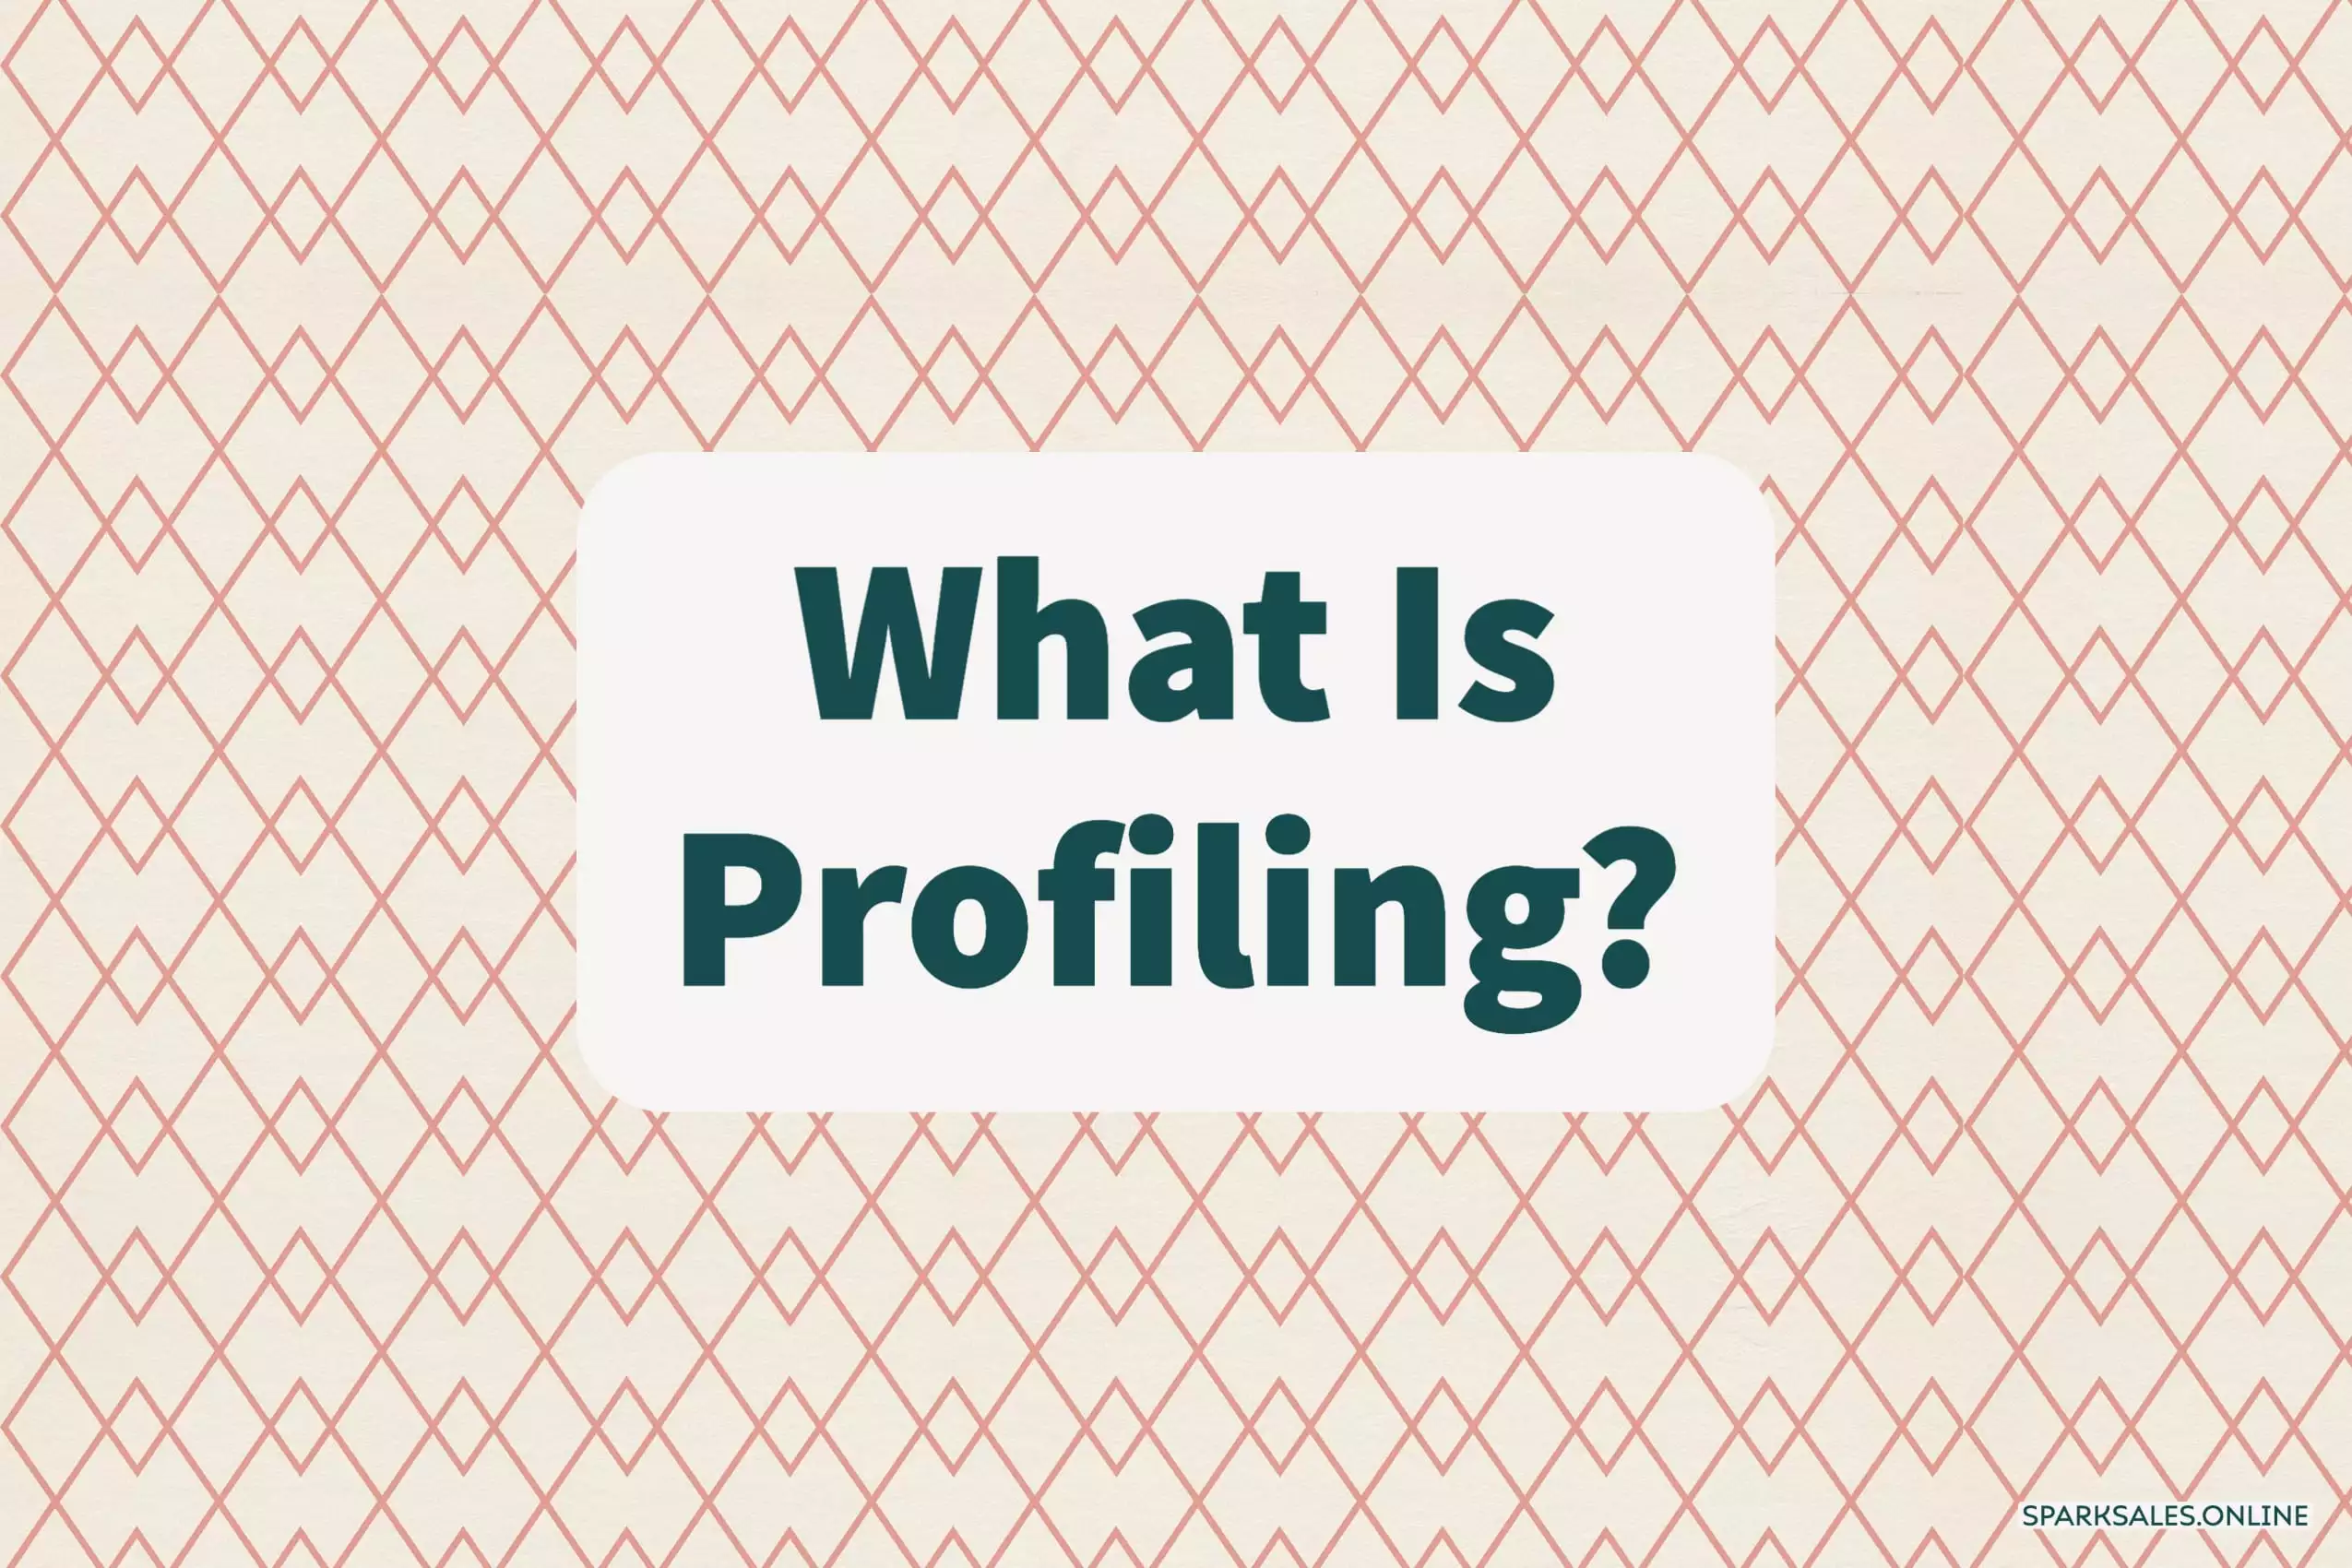 What is profiling?